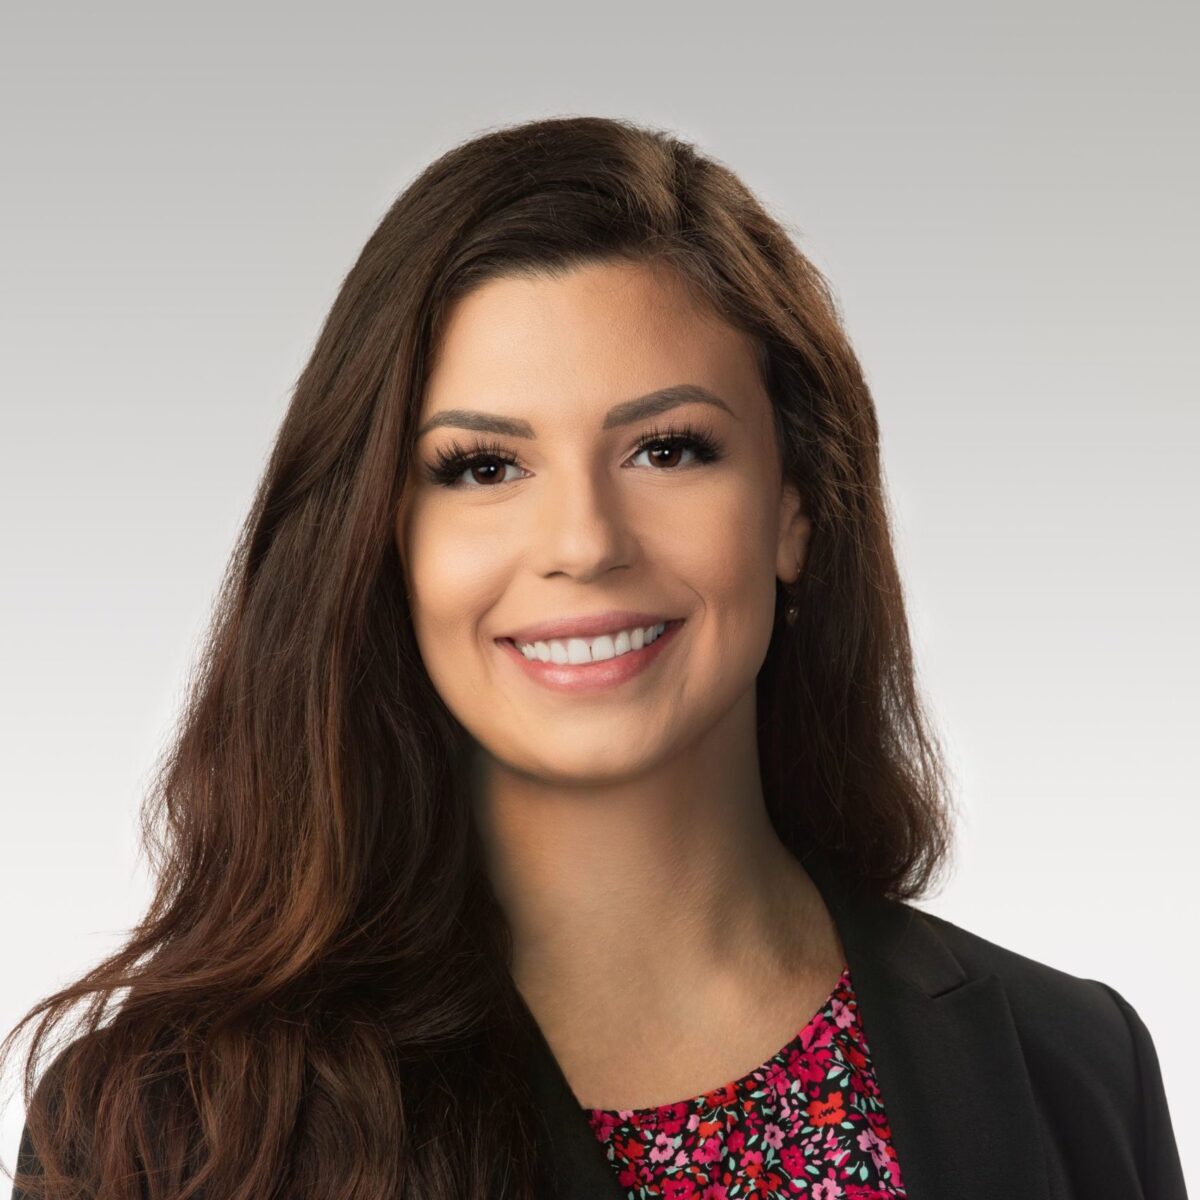 A professional headshot of Hannah S. Rullo, smiling with long brown hair, wearing a black blazer over a floral top, against a light gray background.